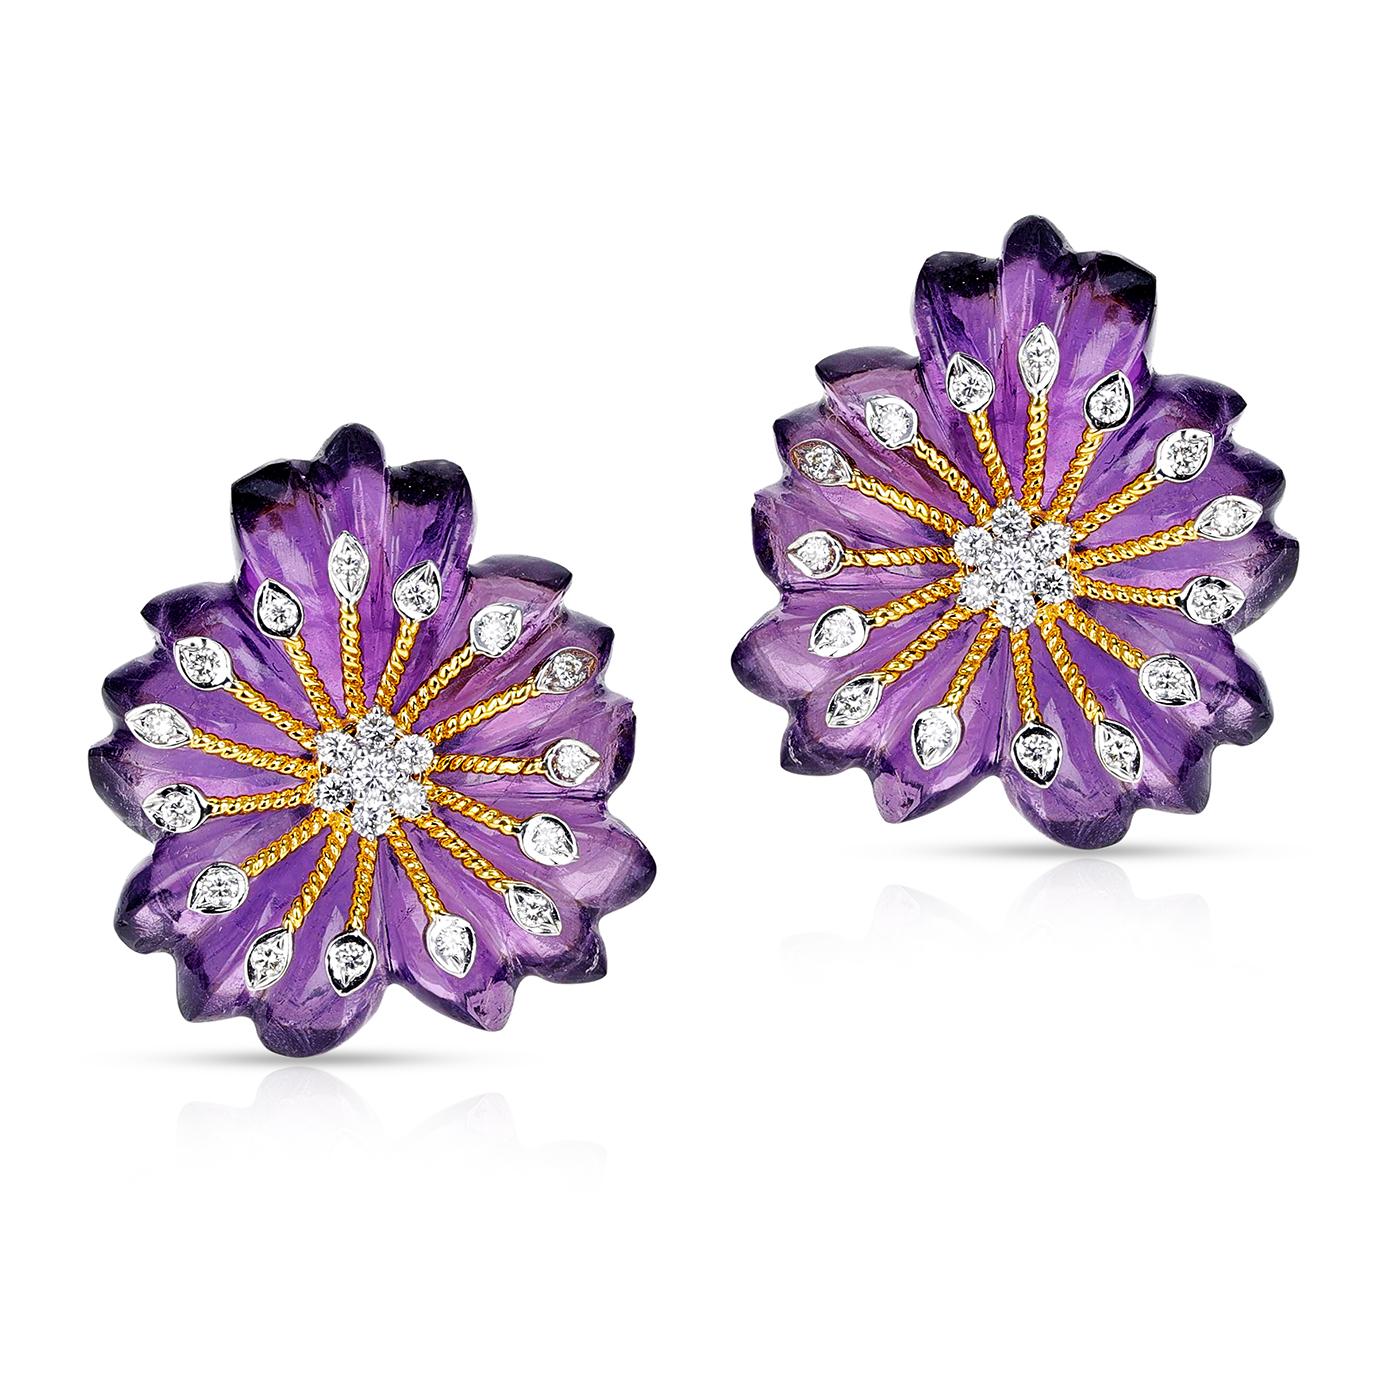 A floral carved pair of Amethyst Earrings with gold work and diamonds. Diamond Weight: 0.45 cts, Amethyst: 44 cts.

14K Yellow Gold.

Diameter: ¾ Inches.

Matching Ring available.

Metal type and stones can be customized.